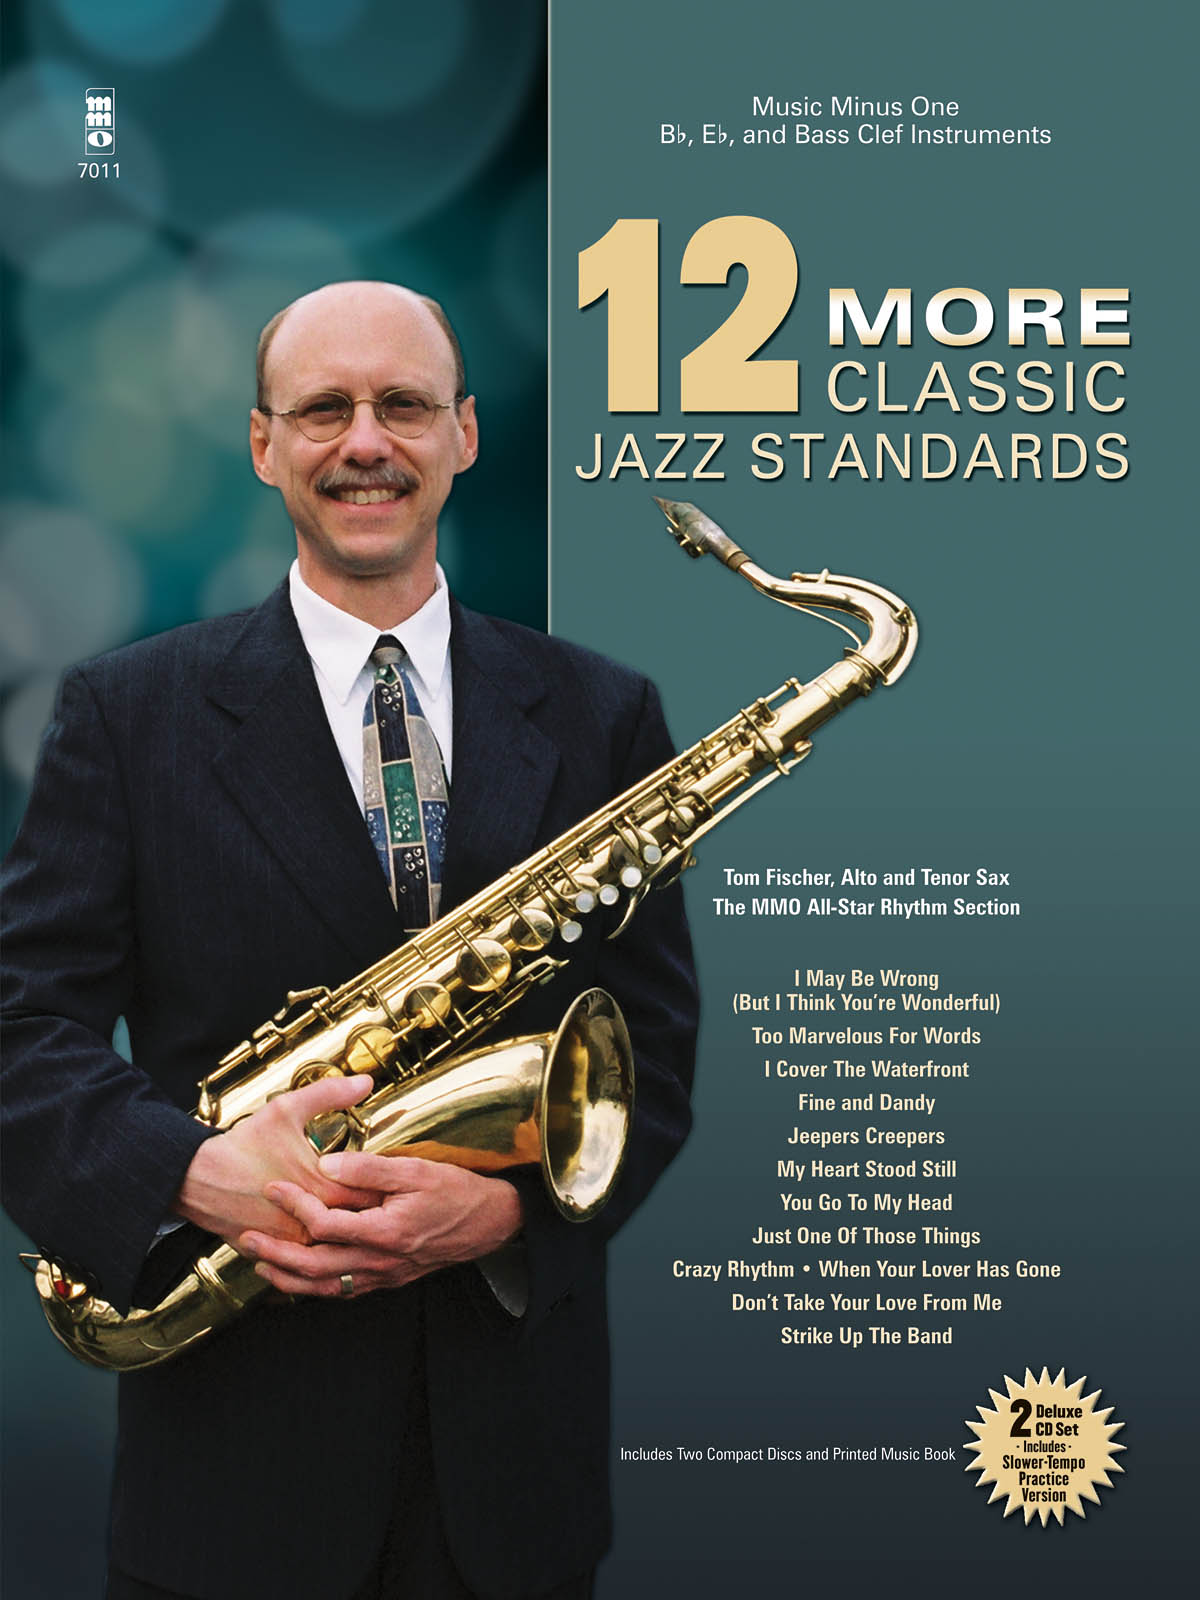 12 More Classic Jazz Standards - Music Minus One Bb, Eb, and Bass Clef Instruments Deluxe 2-CD Set - noty na saxofon